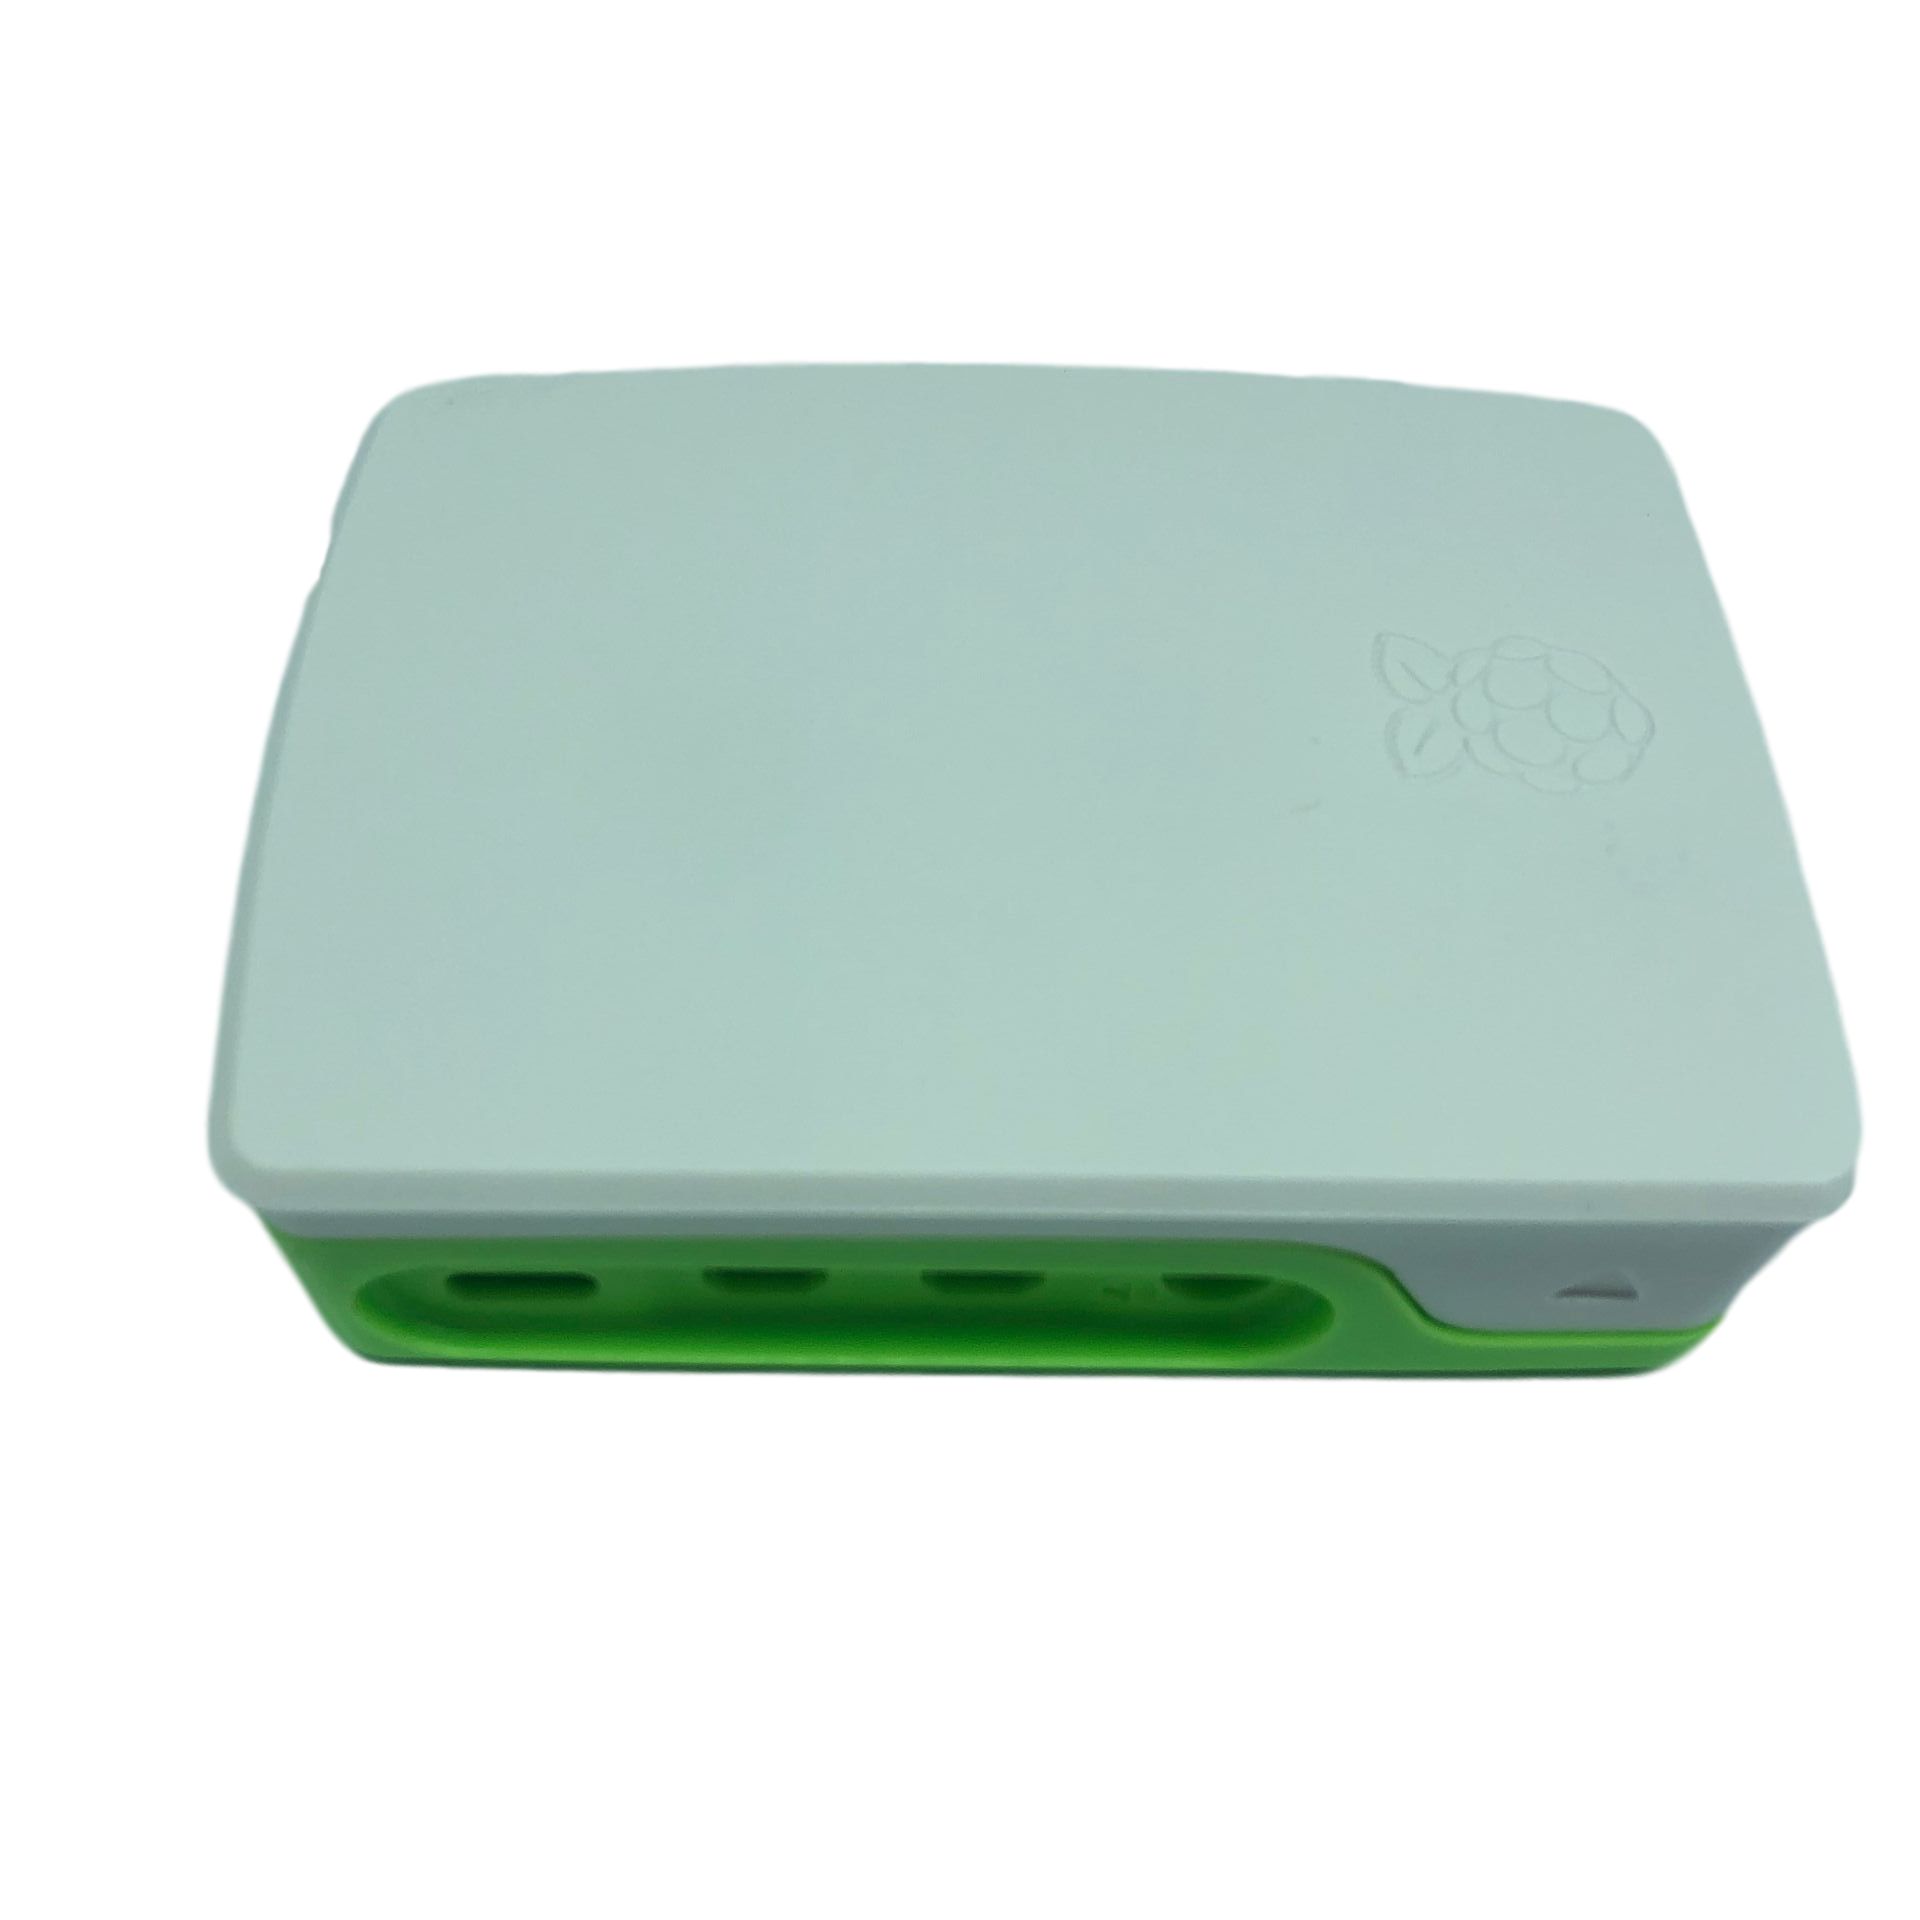 Official-Protective-Case-Classic-Green-White-Plastic-Box-for-Raspberry-Pi-4B-1738901